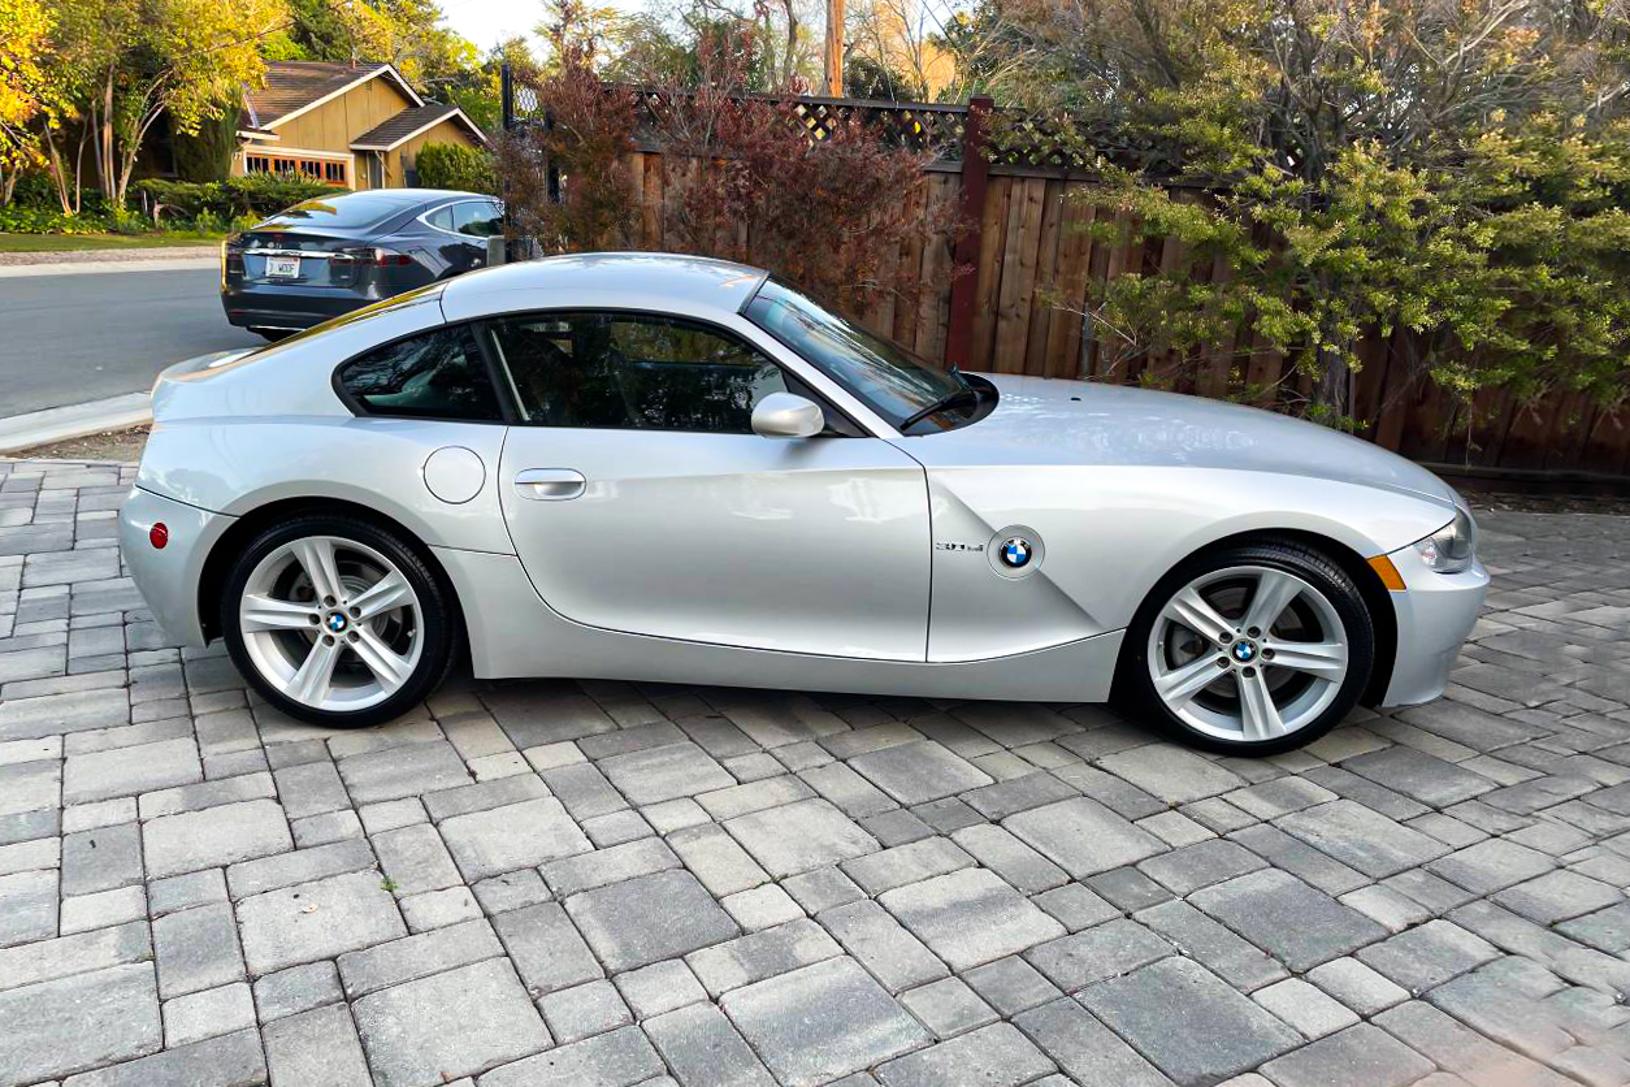 2007 BMW Z4 3.0si Coupe | Built for Backroads